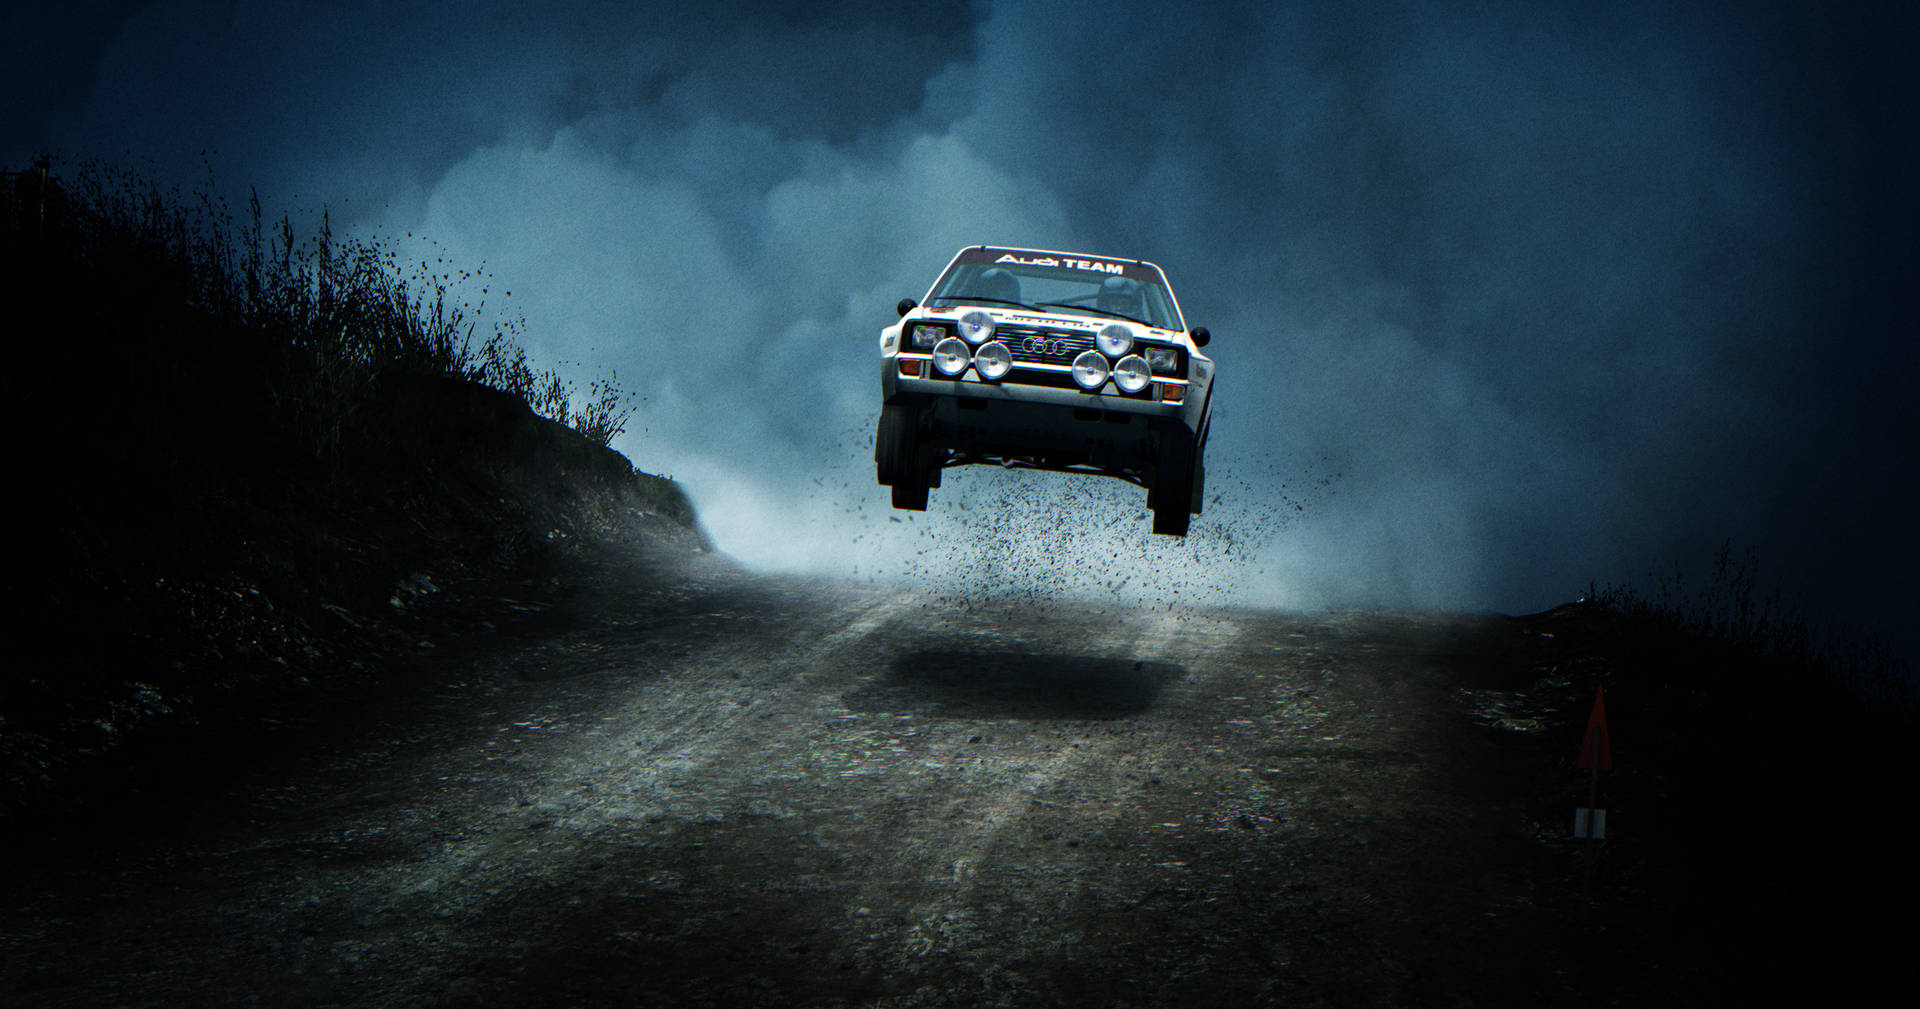 Thrilling Jump Action In Dirt Rally Background